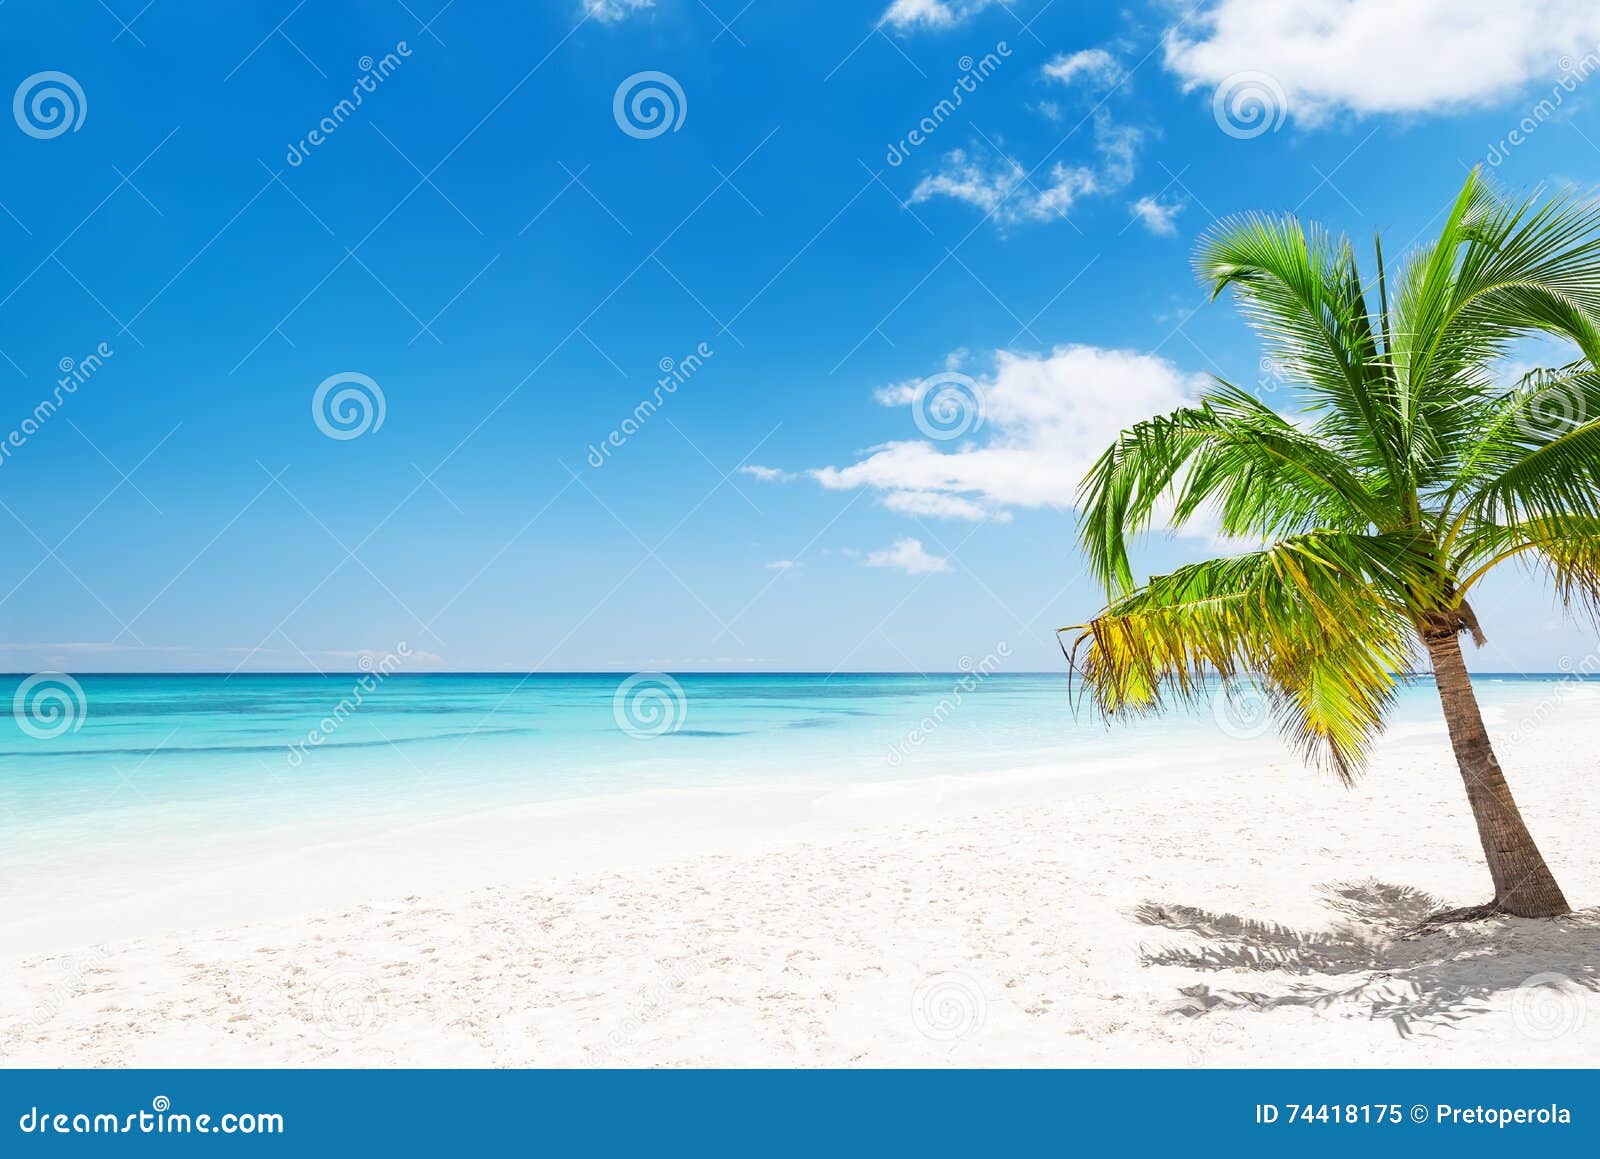 coconut palm trees on white sandy beach in punta cana, dominican